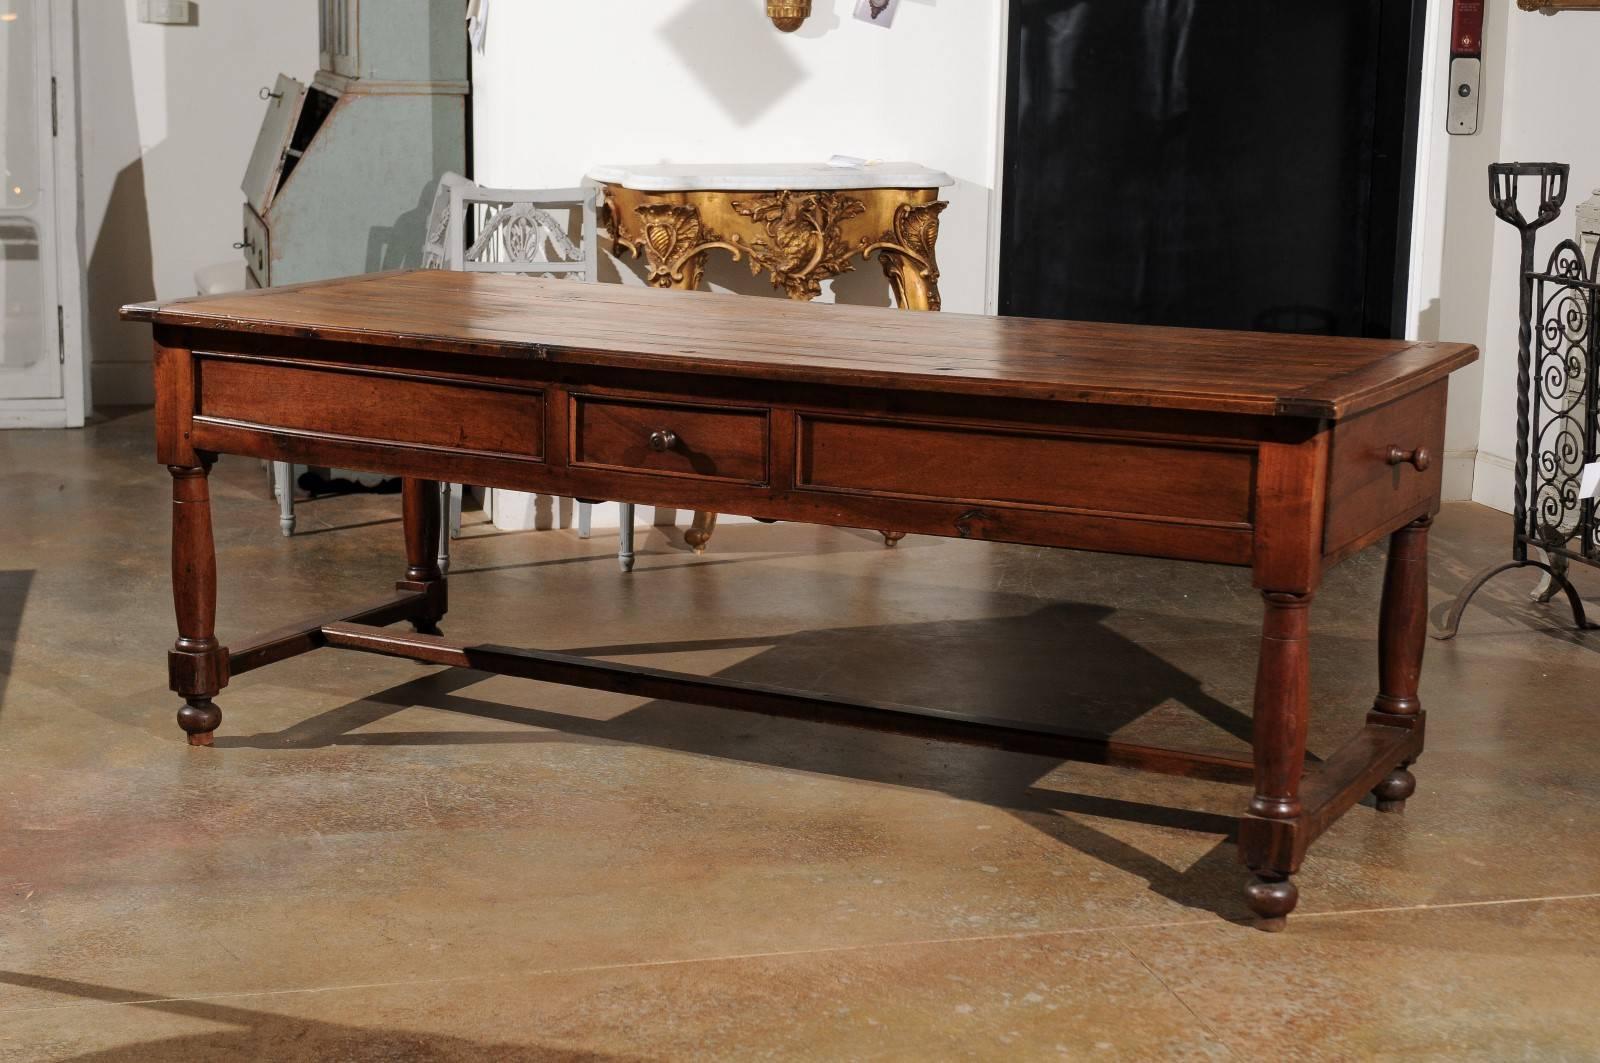 A French walnut and acacia wood sofa table with four drawers, turned legs and cross stretcher from the late 18th century. Born in the later years of King Louis XVI's reign, this French sofa table features a rectangular planked top sitting above an